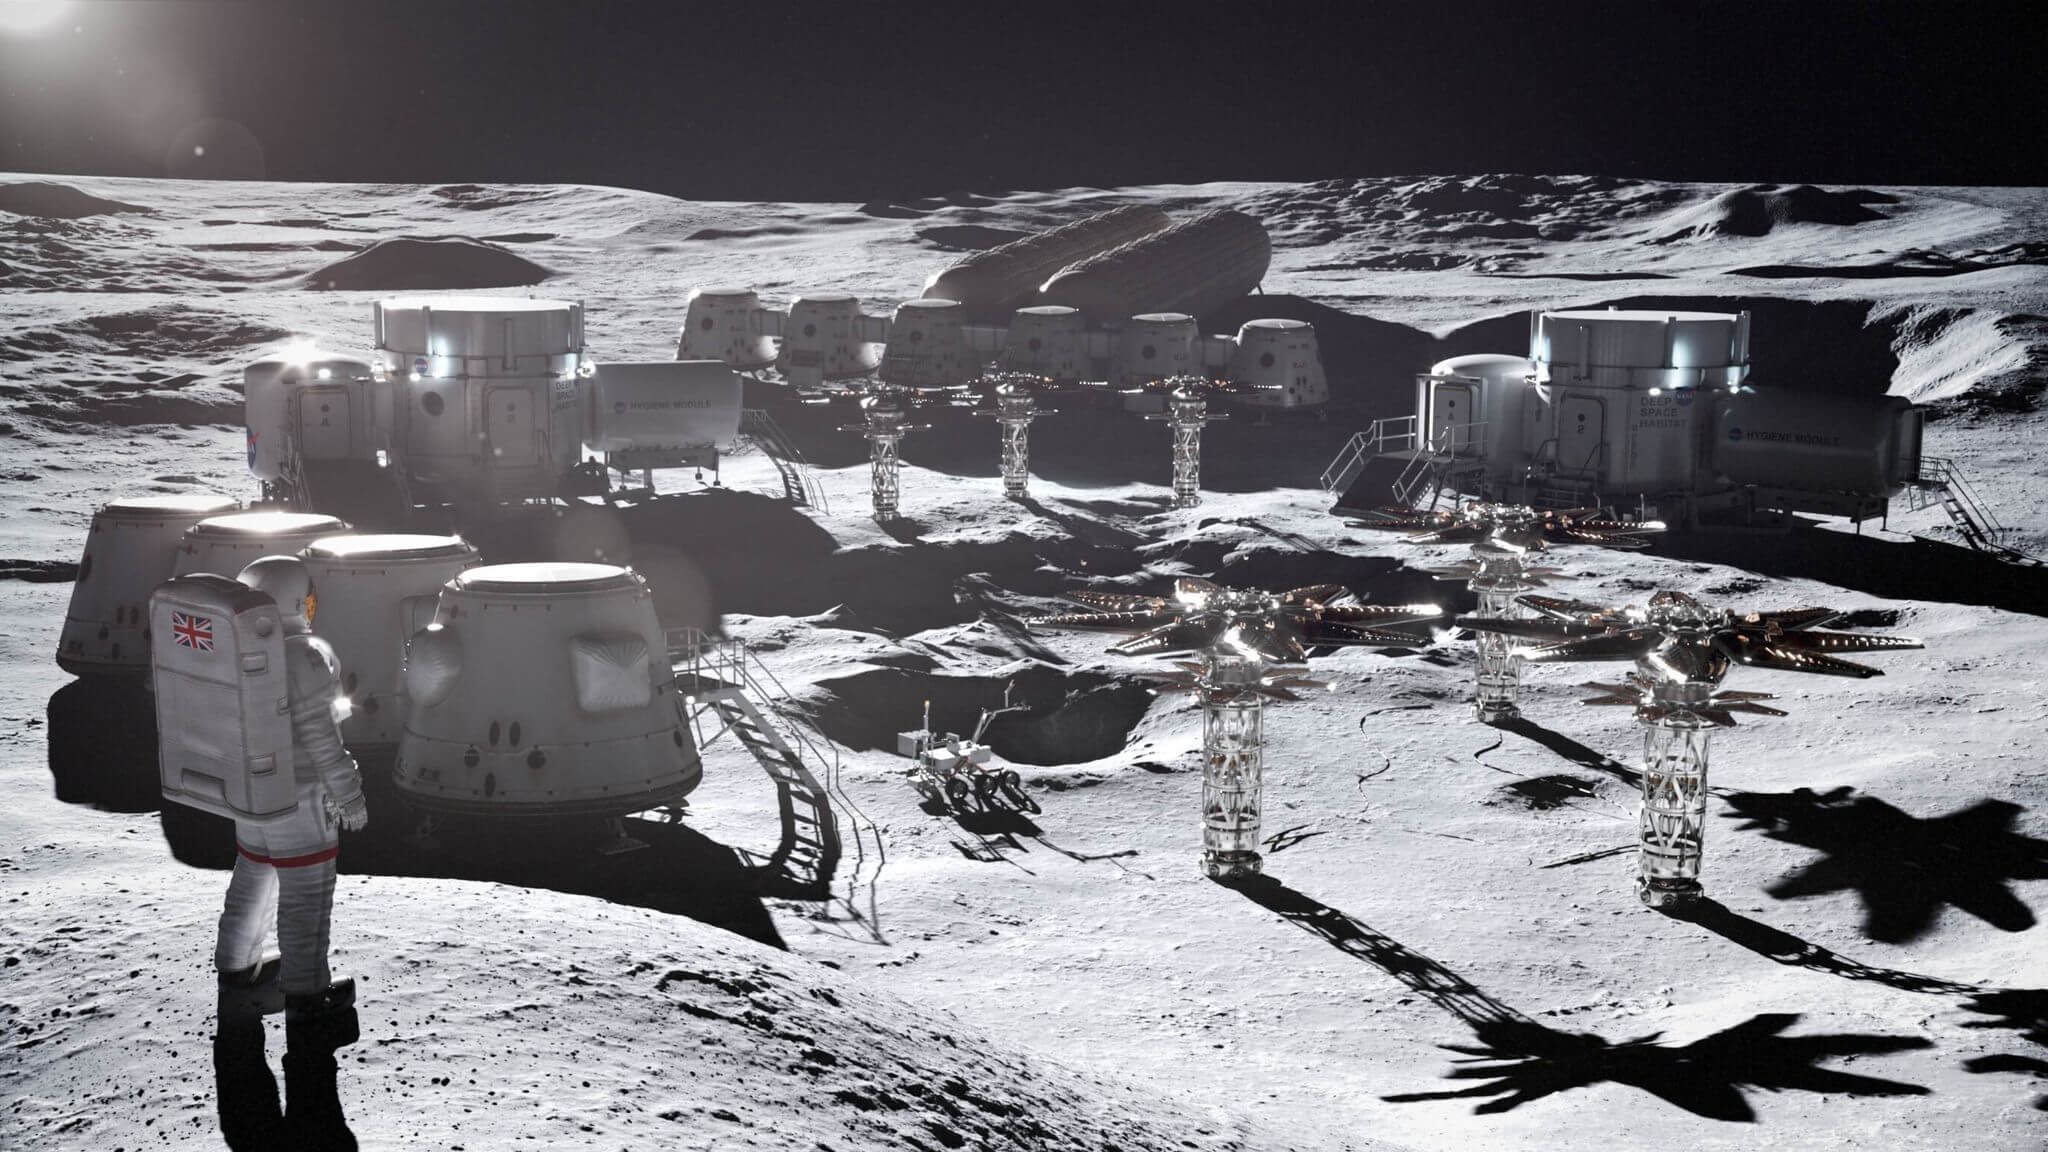 A Rolls-Royce nuclear engine for the Moon